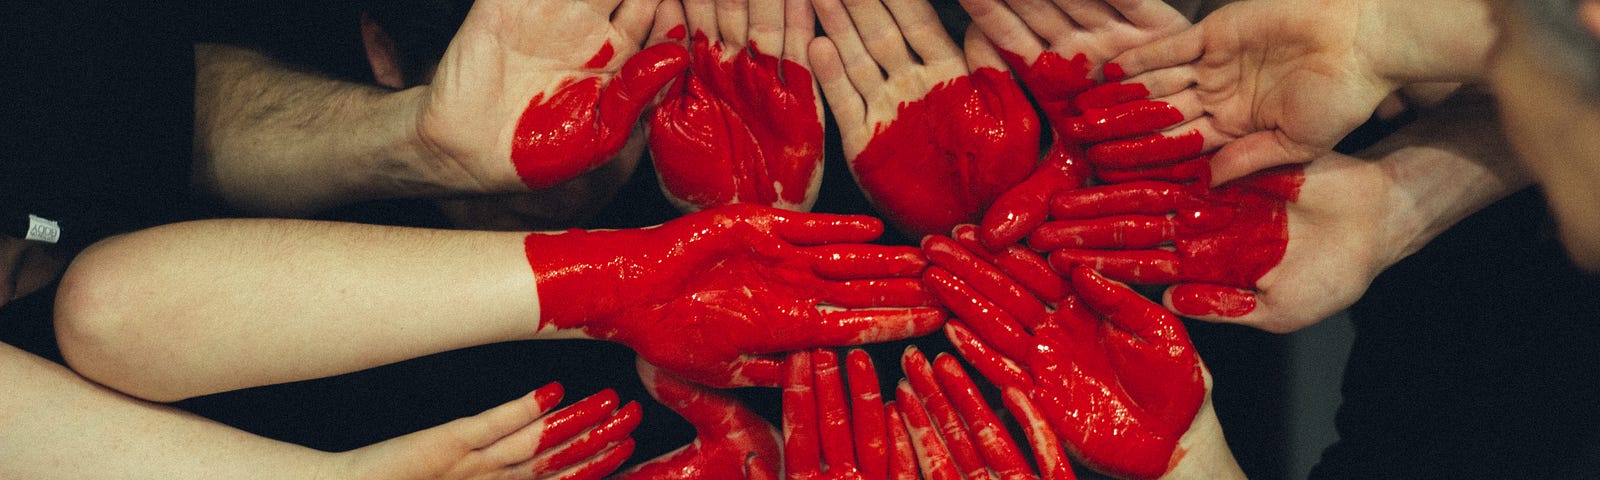 A bunch of hands placed together, palm-out, with a heart drawn on them in dripping blood-red paint. This is way more sinister than the photographers were envisioning.